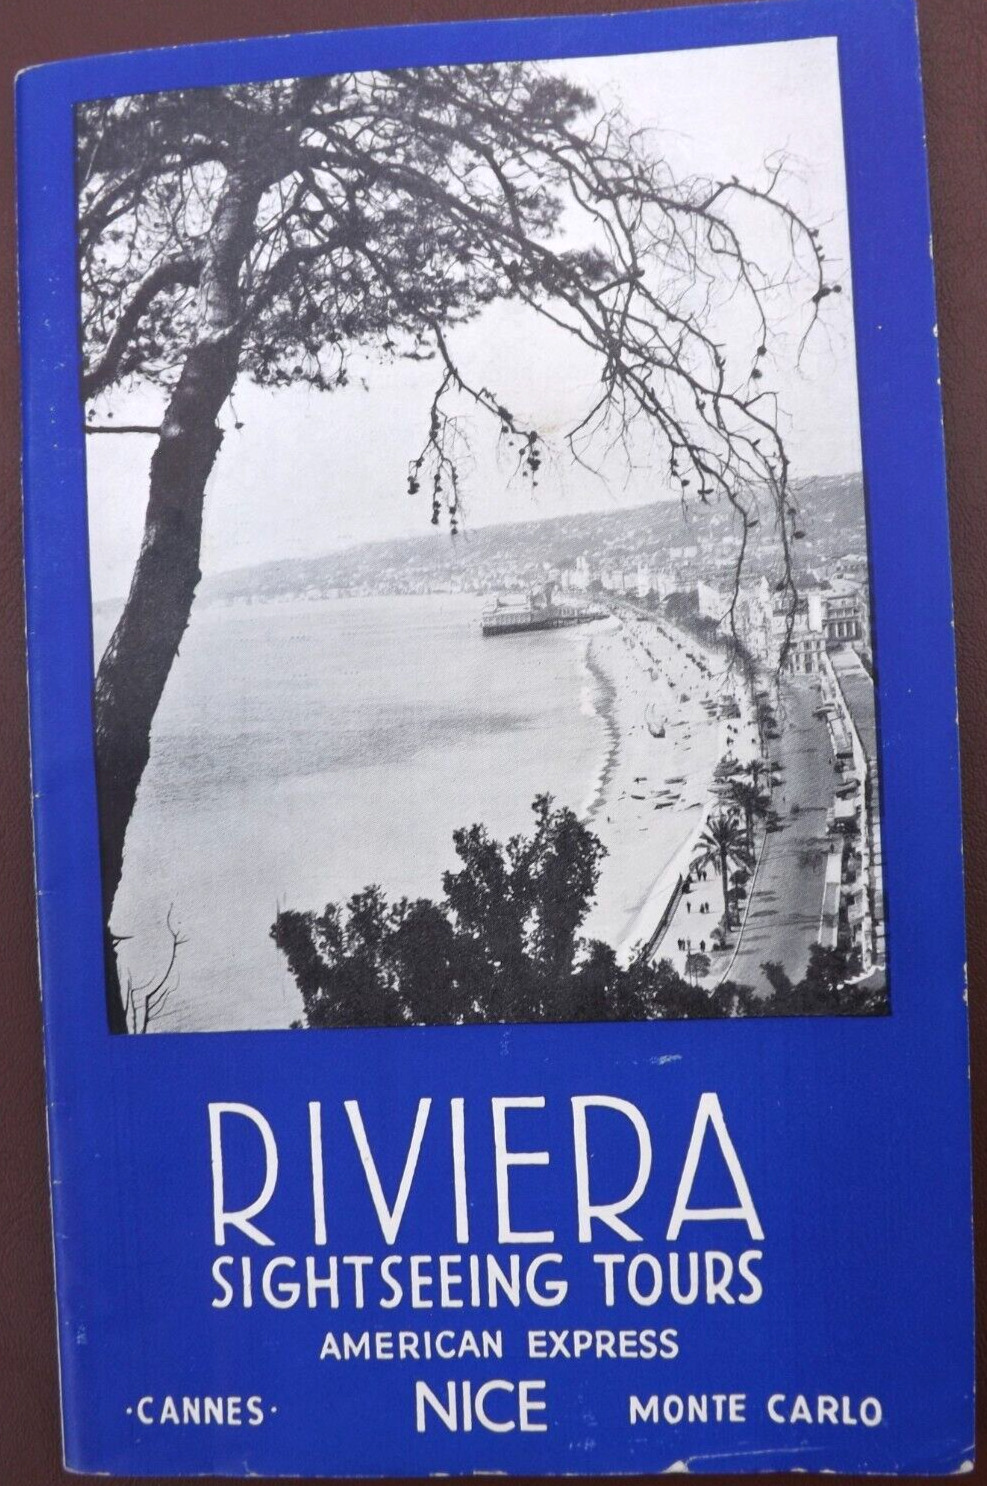 VINTAGE 1937 RIVIERA BROCHURE BOOKLET MAP TOURS 36 PAGES NICE CANNES MONTE CARLO